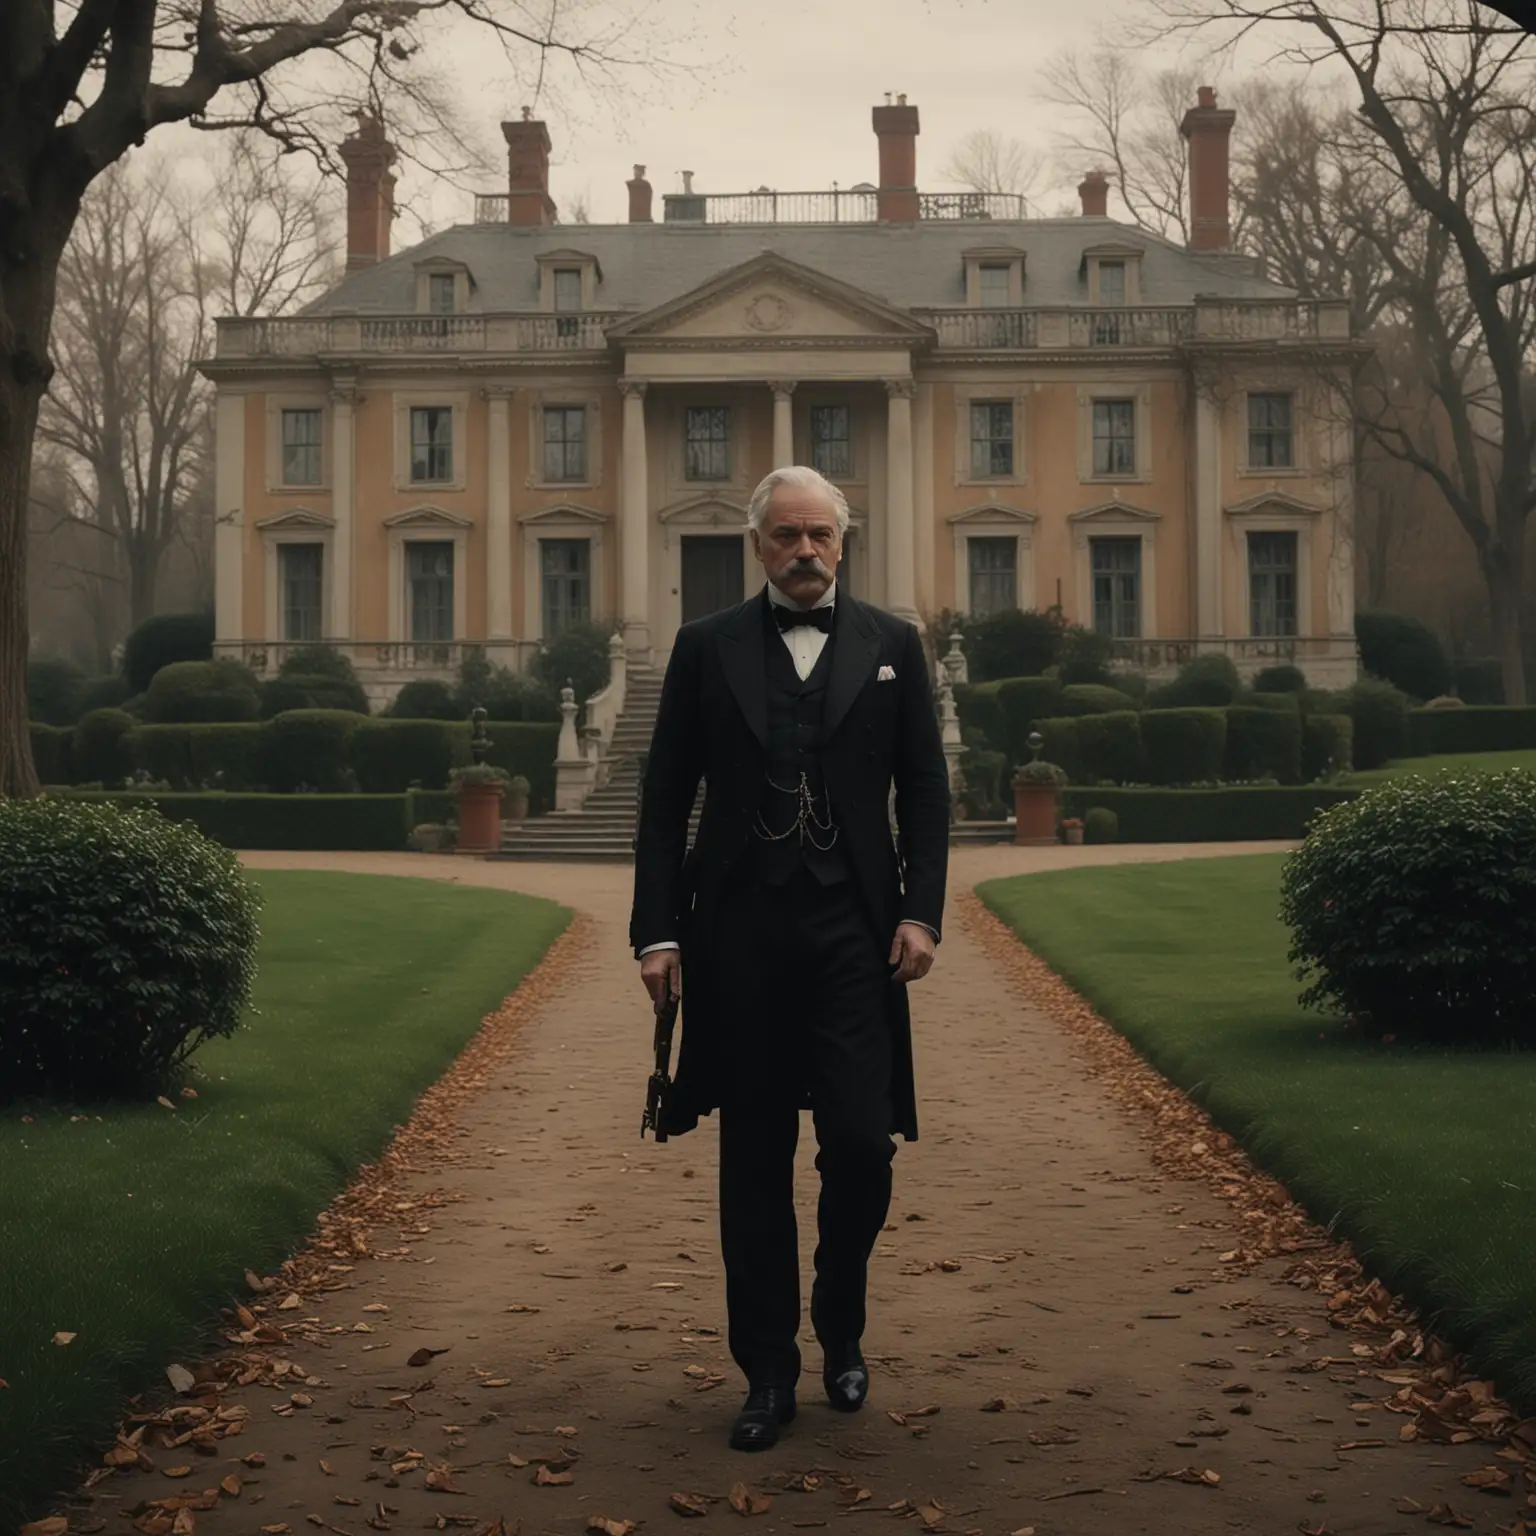 Cinematic and dramatic, realistic portrait.
Background: mansion, walking on the garden,  create a background during the 1900 era
Scene: J.P morgan standing 